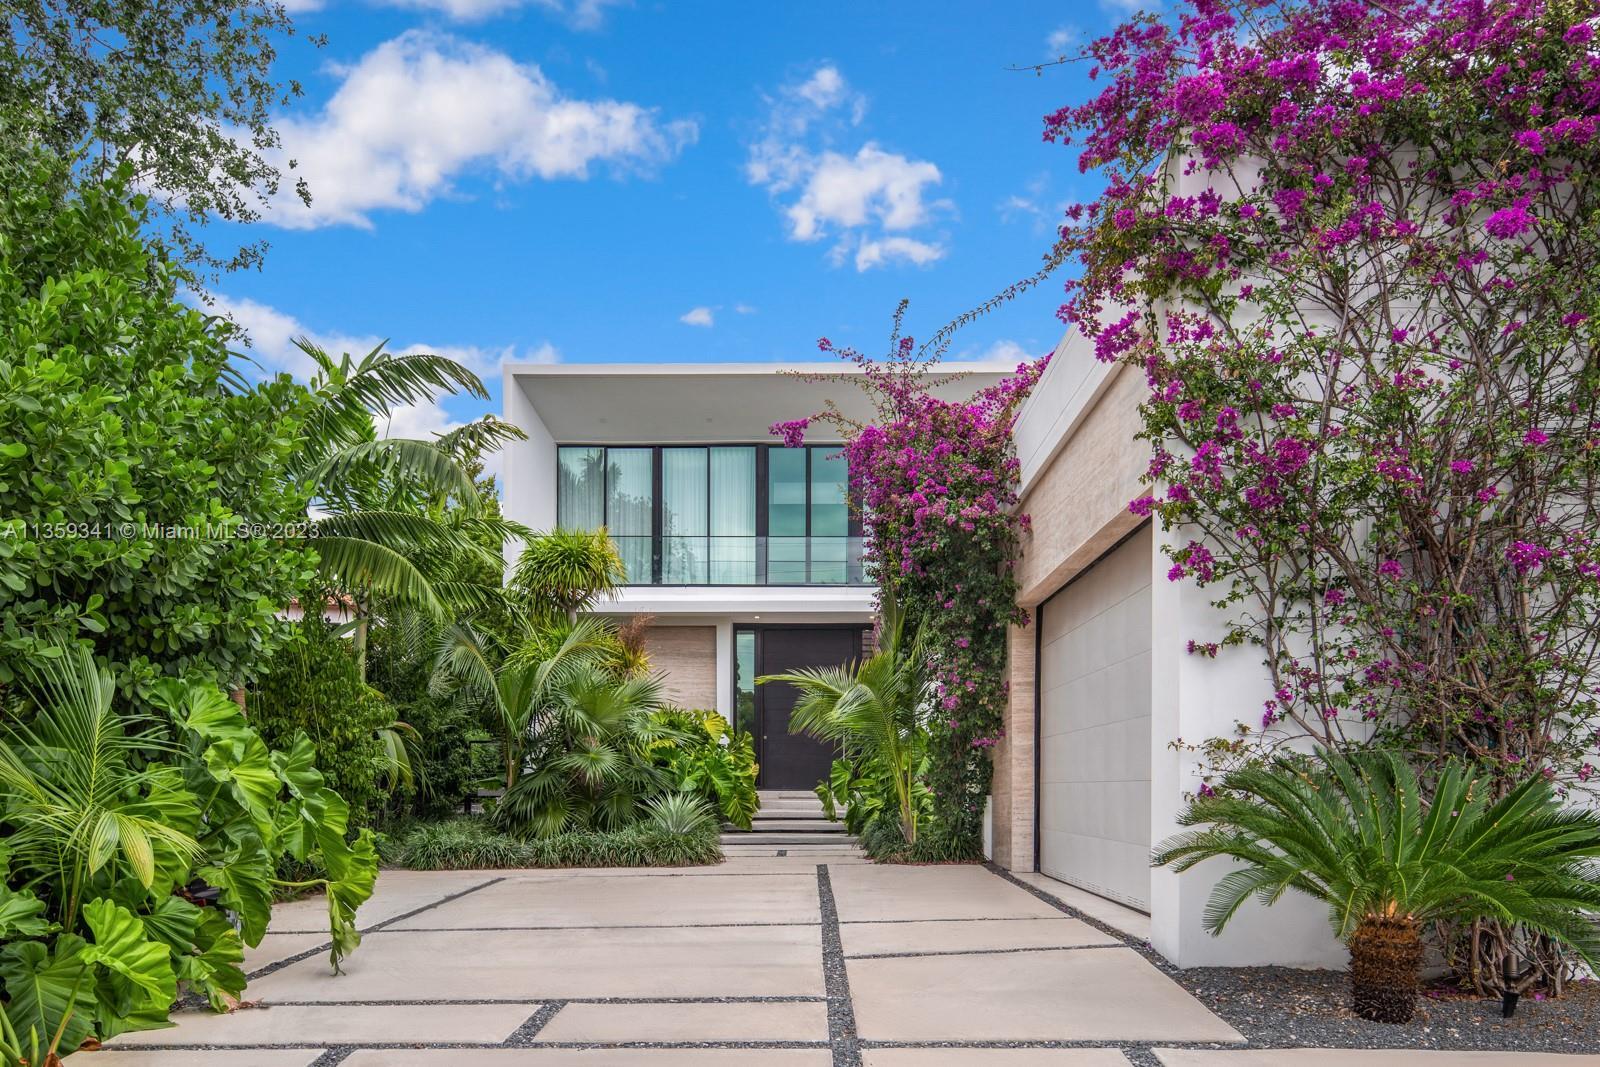 Step Inside With Me! Draped in bougainvillea, this modern waterfront on coveted lower North Bay Road